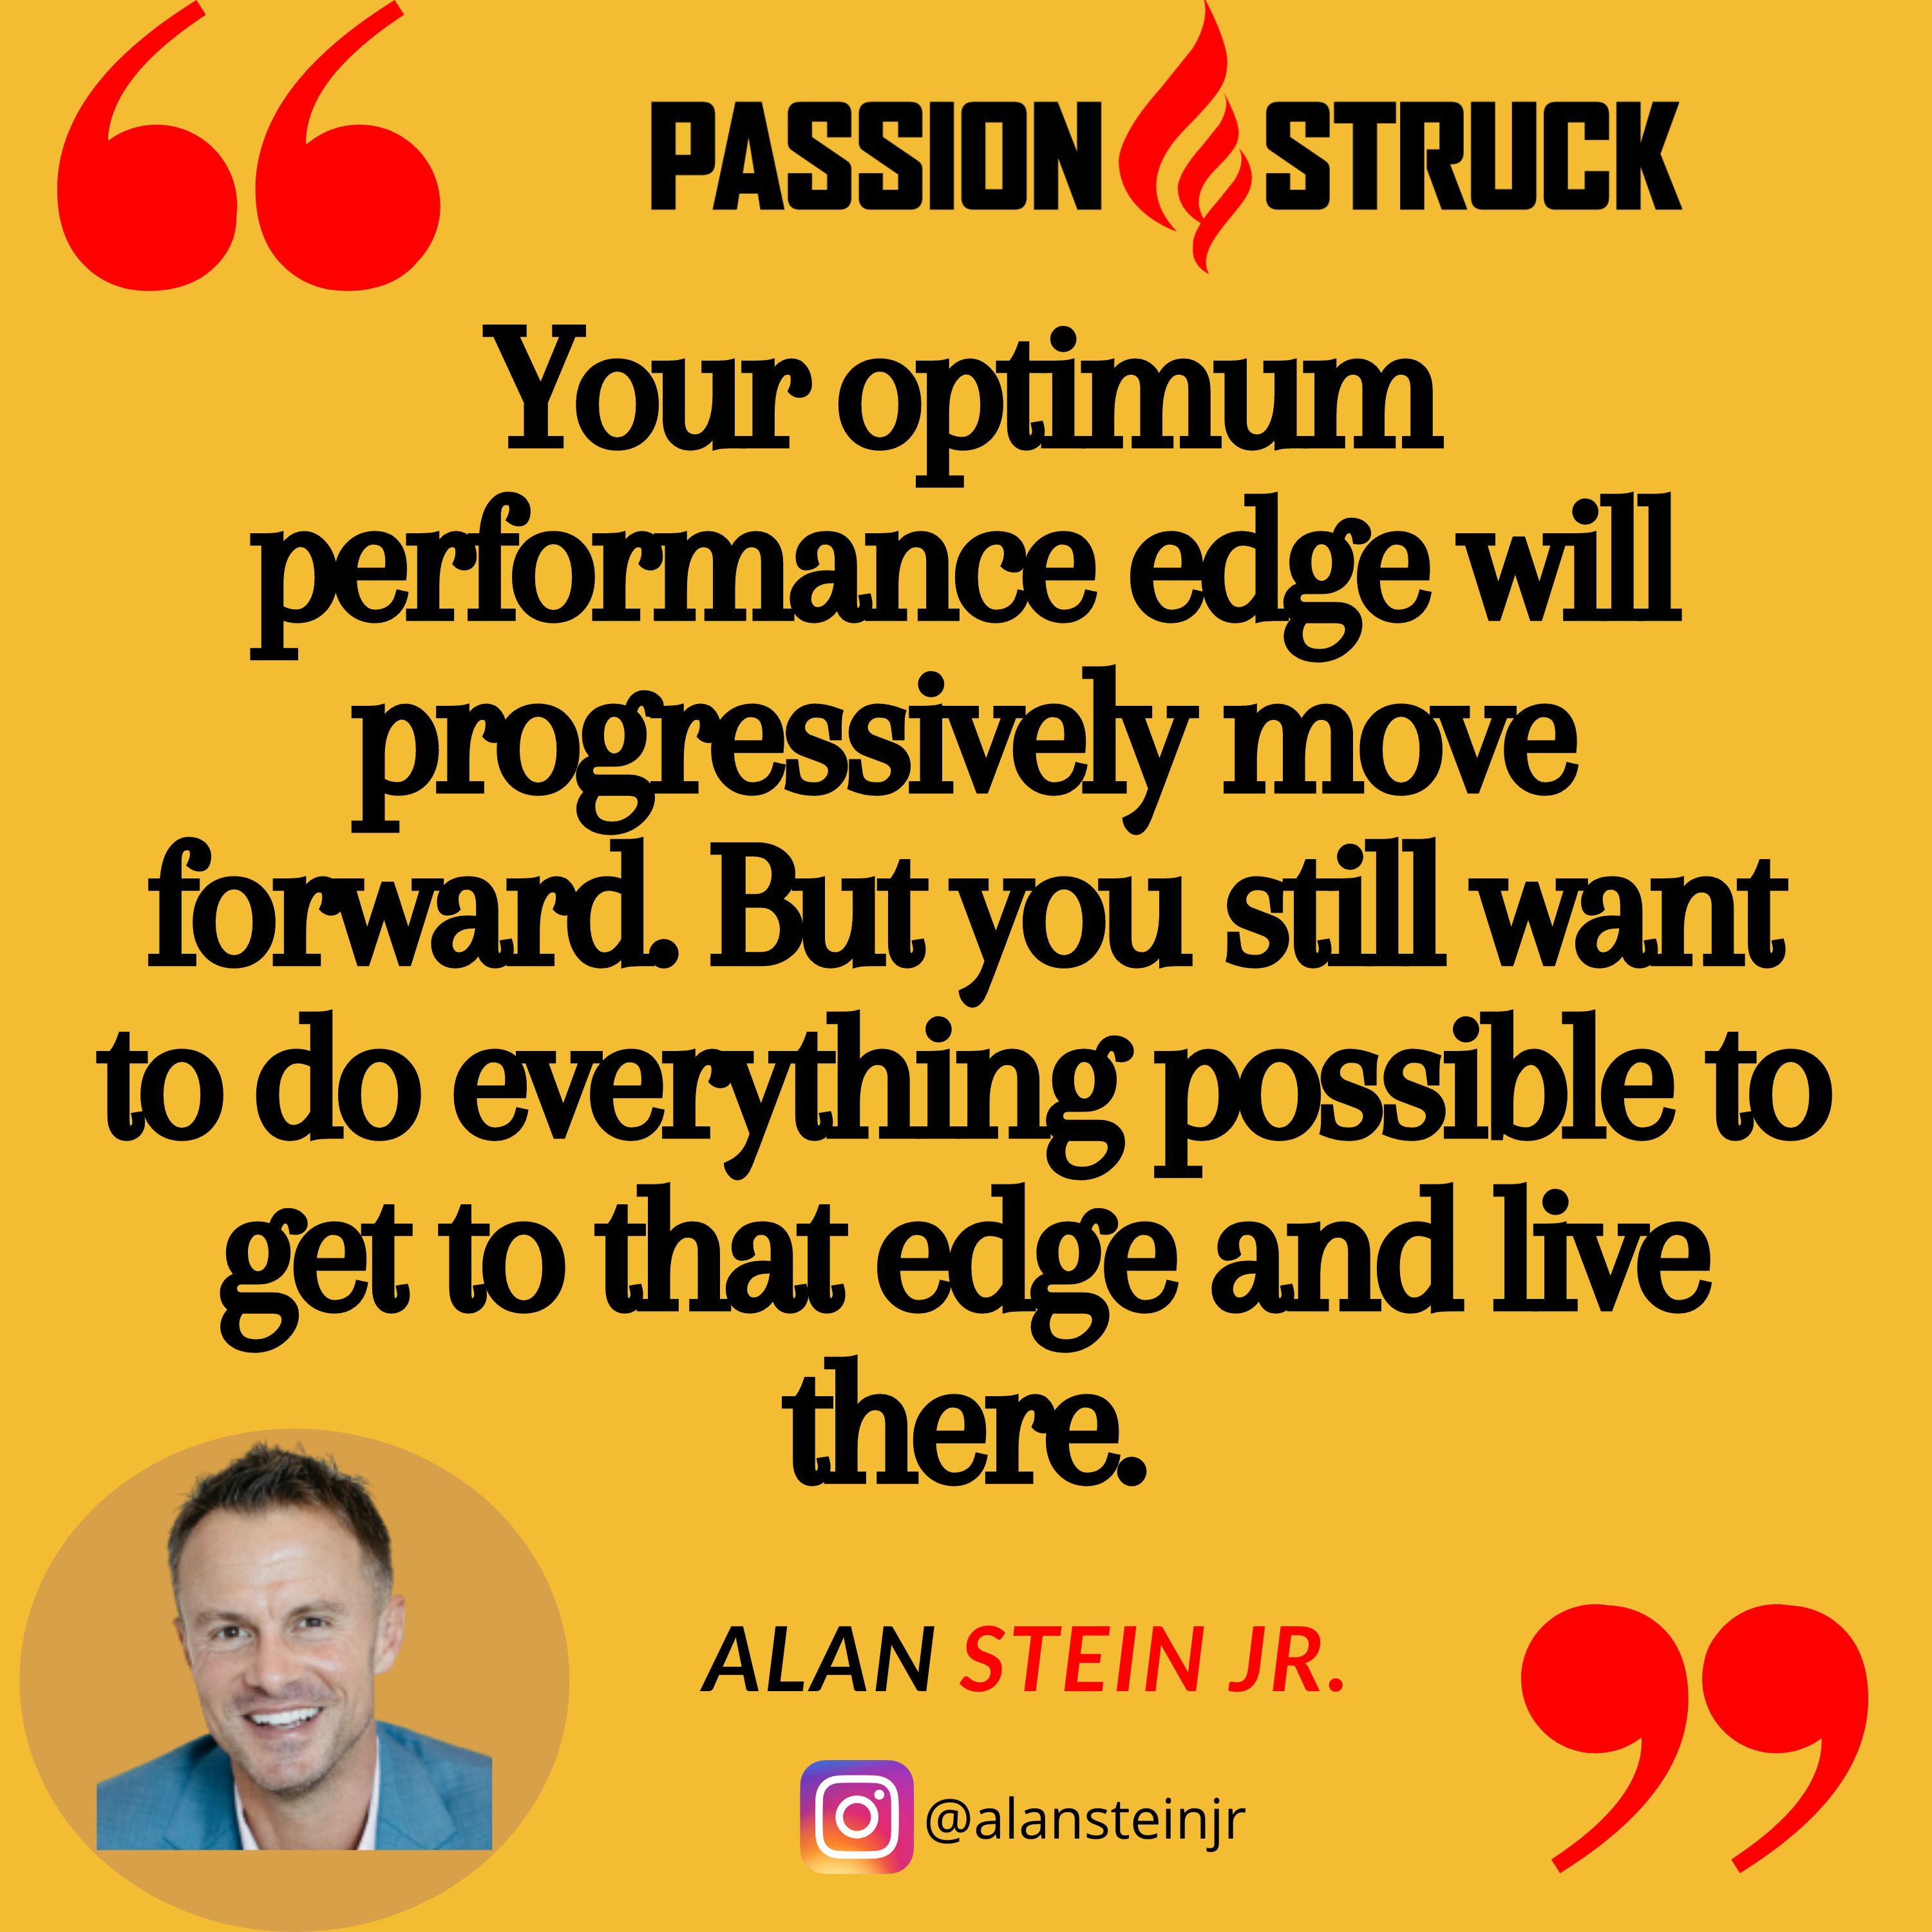 Alan Stein Jr. quote from the Passion Struck podcast: Your peak performance edge will progressively move forward. But you still want to do everything possible to get to that edge and live there.